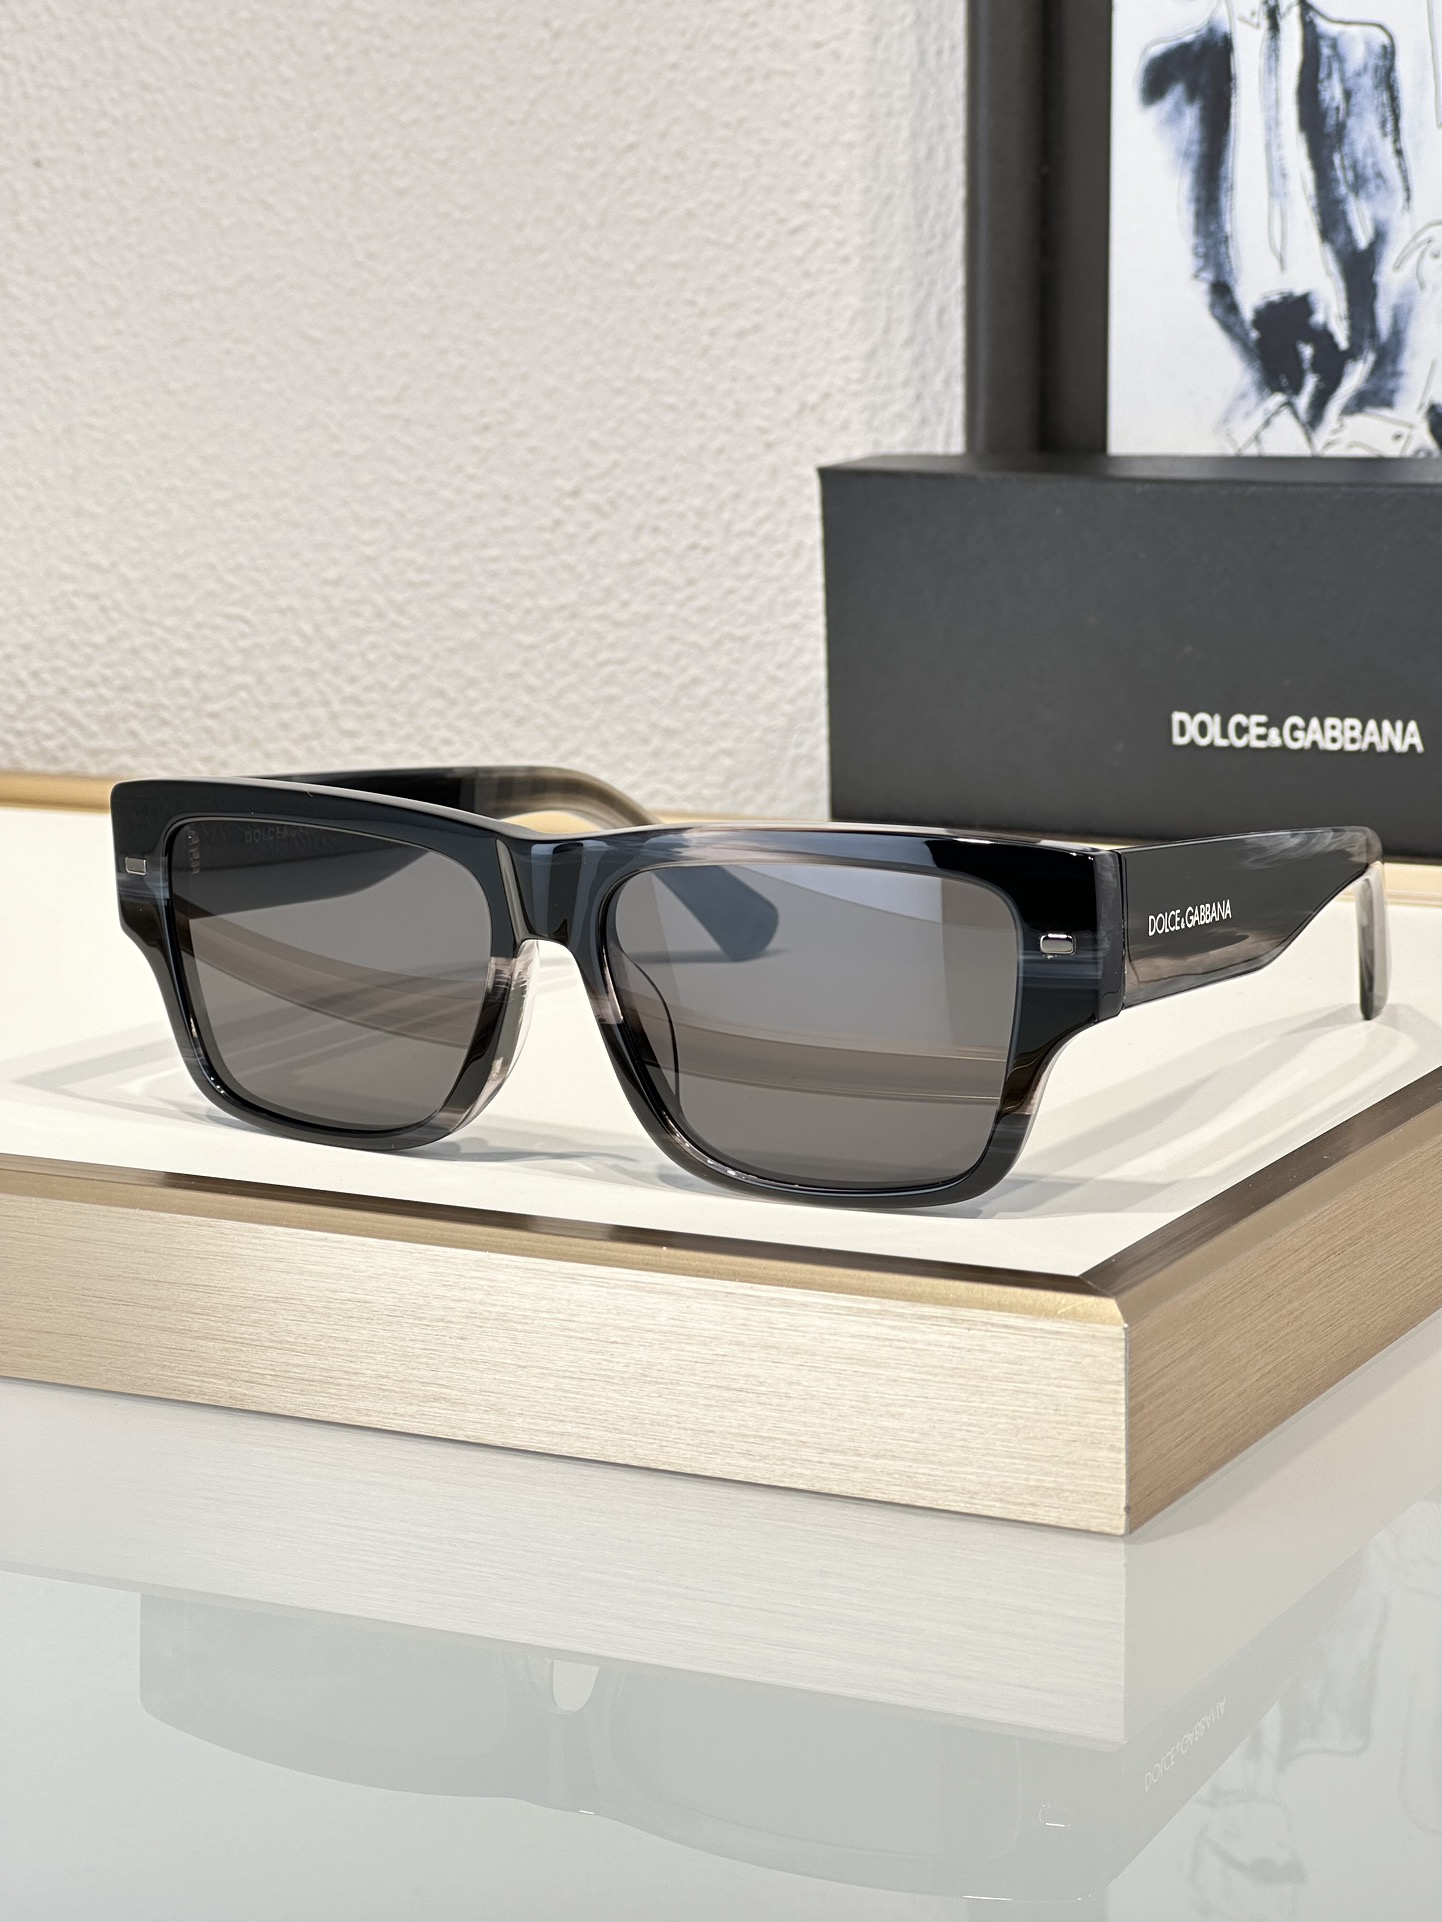 Replica How Can You
 Dolce & Gabbana Sunglasses Best Quality